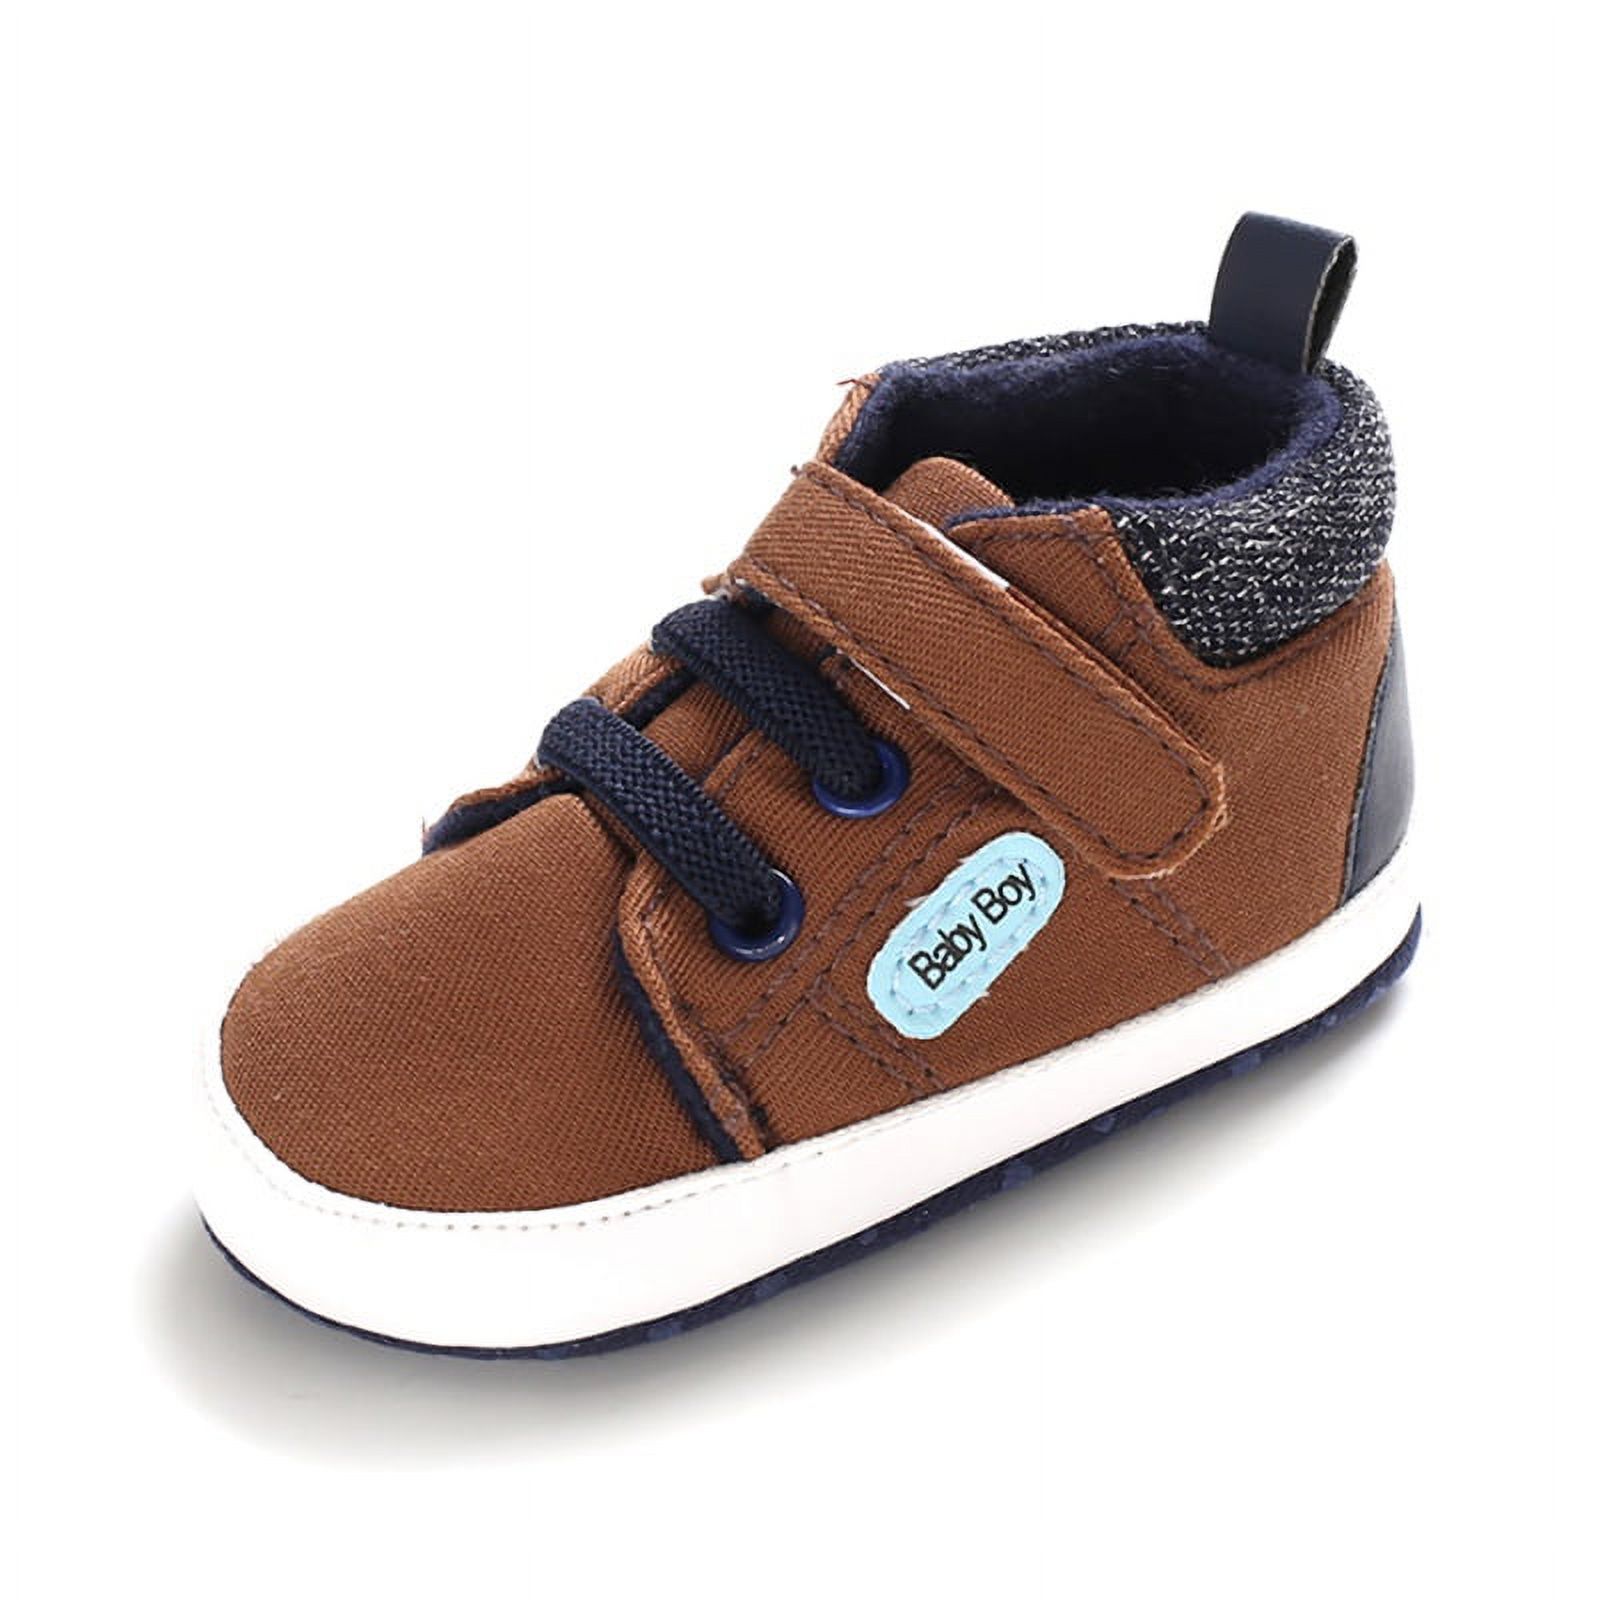 Infant Baby Boys Girls Canvas Toddler Sneakers Rubber Sole Non-Slip Candy Shoes First Walkers Prewalker Crib Shoes - image 1 of 8